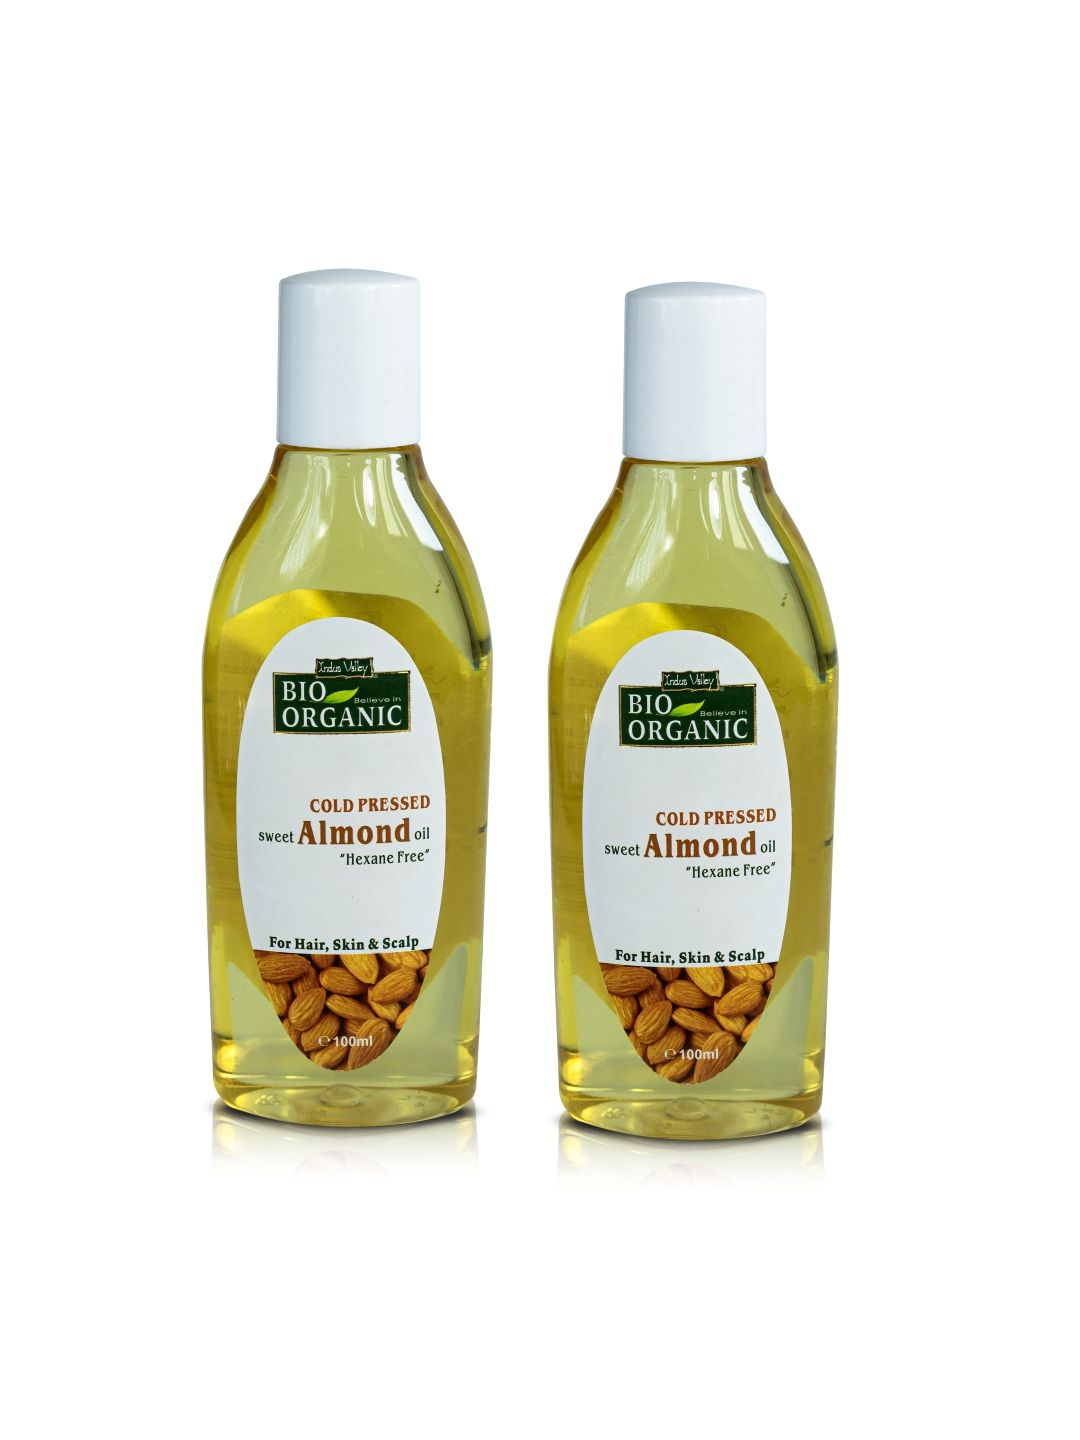 Indus valley Pack of 2 bio Organic Almond oil Price in India